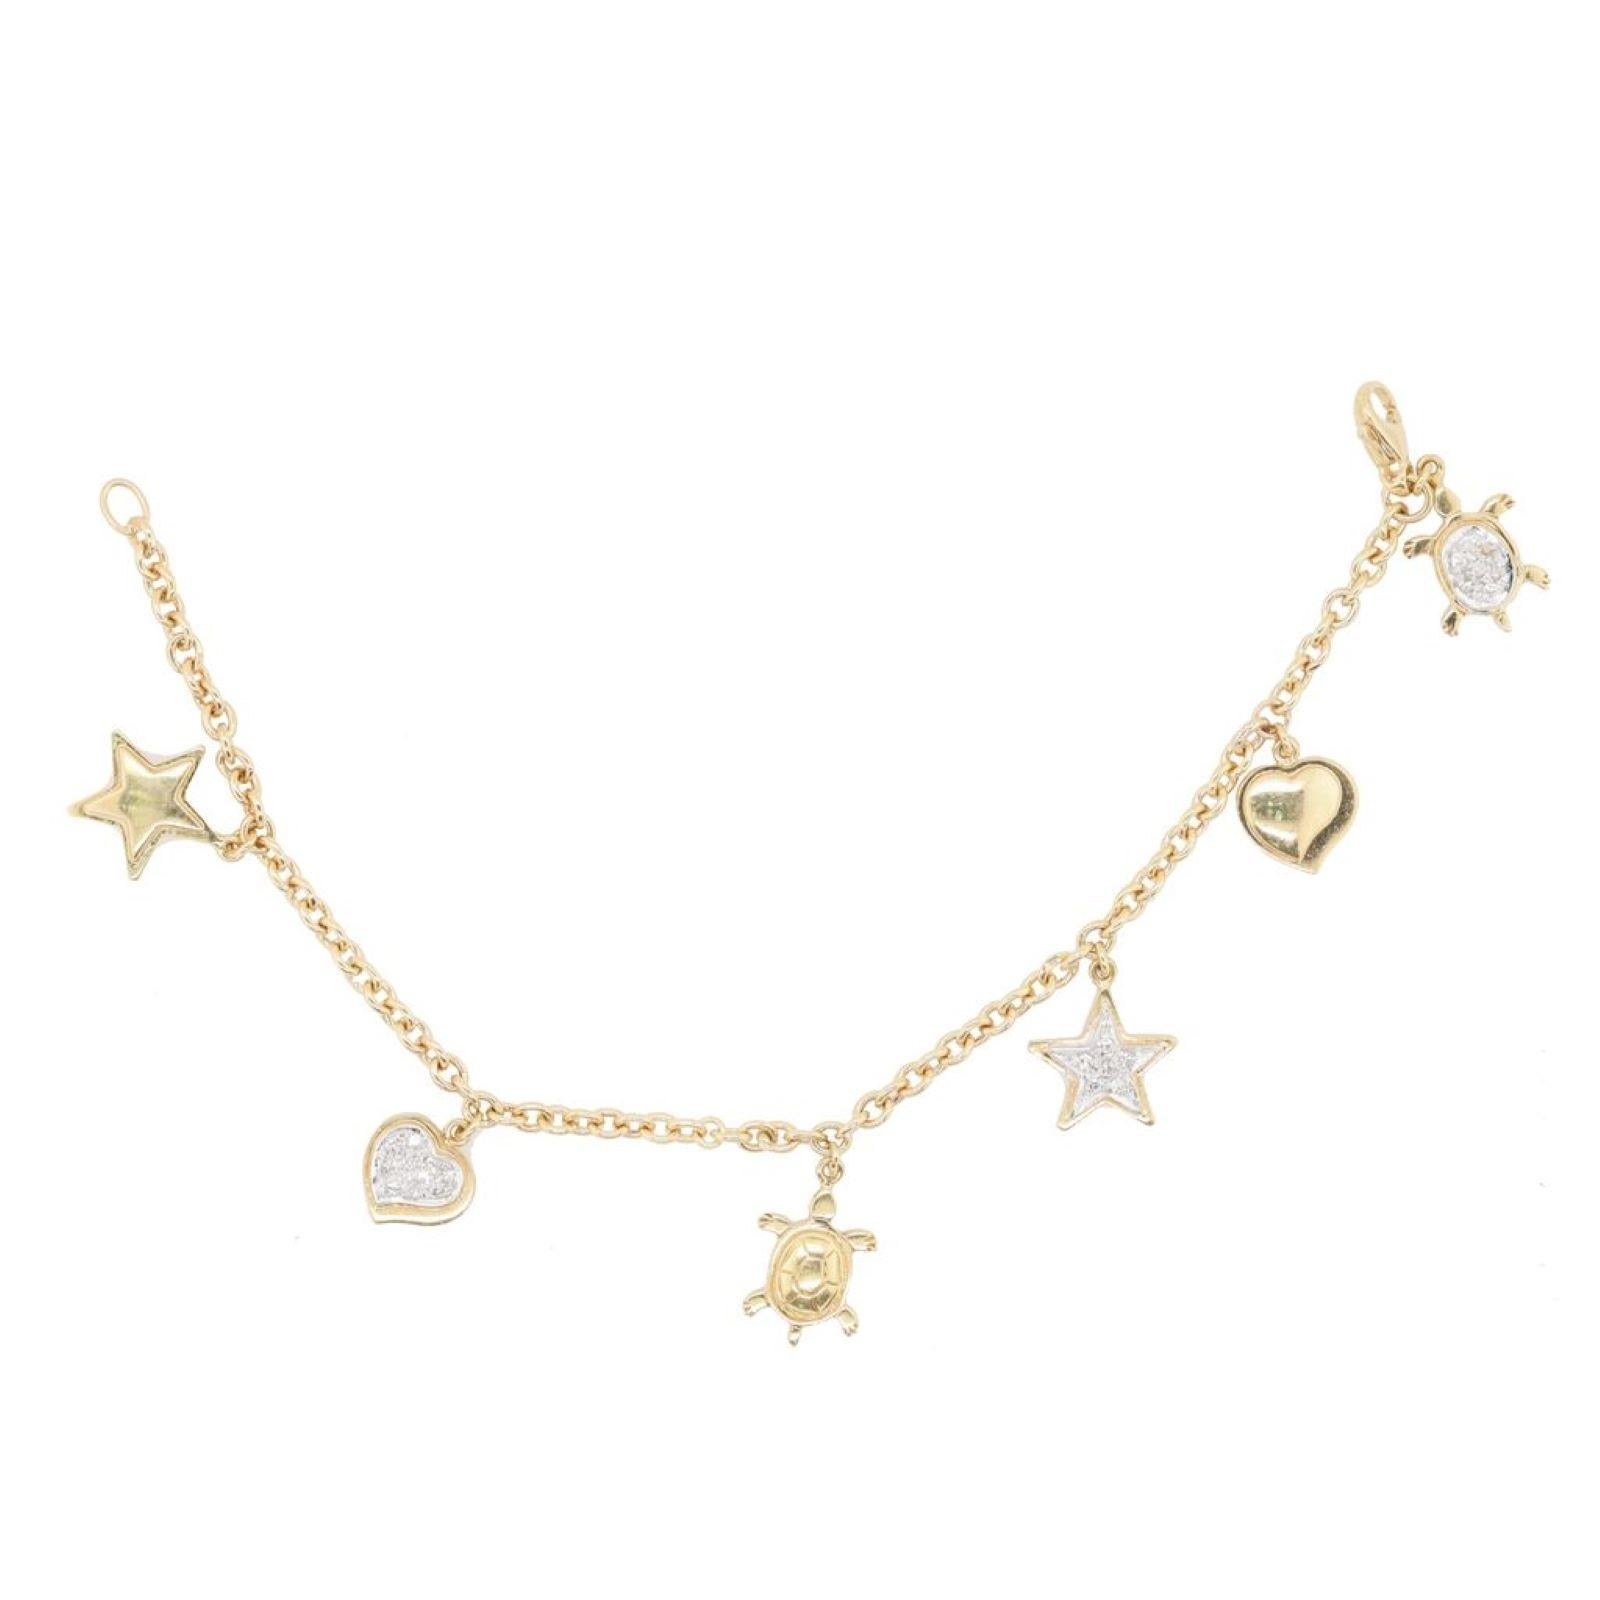 18kt yellow gold star, turtle, and heart bracelet featuring 0.35 cts of diamonds